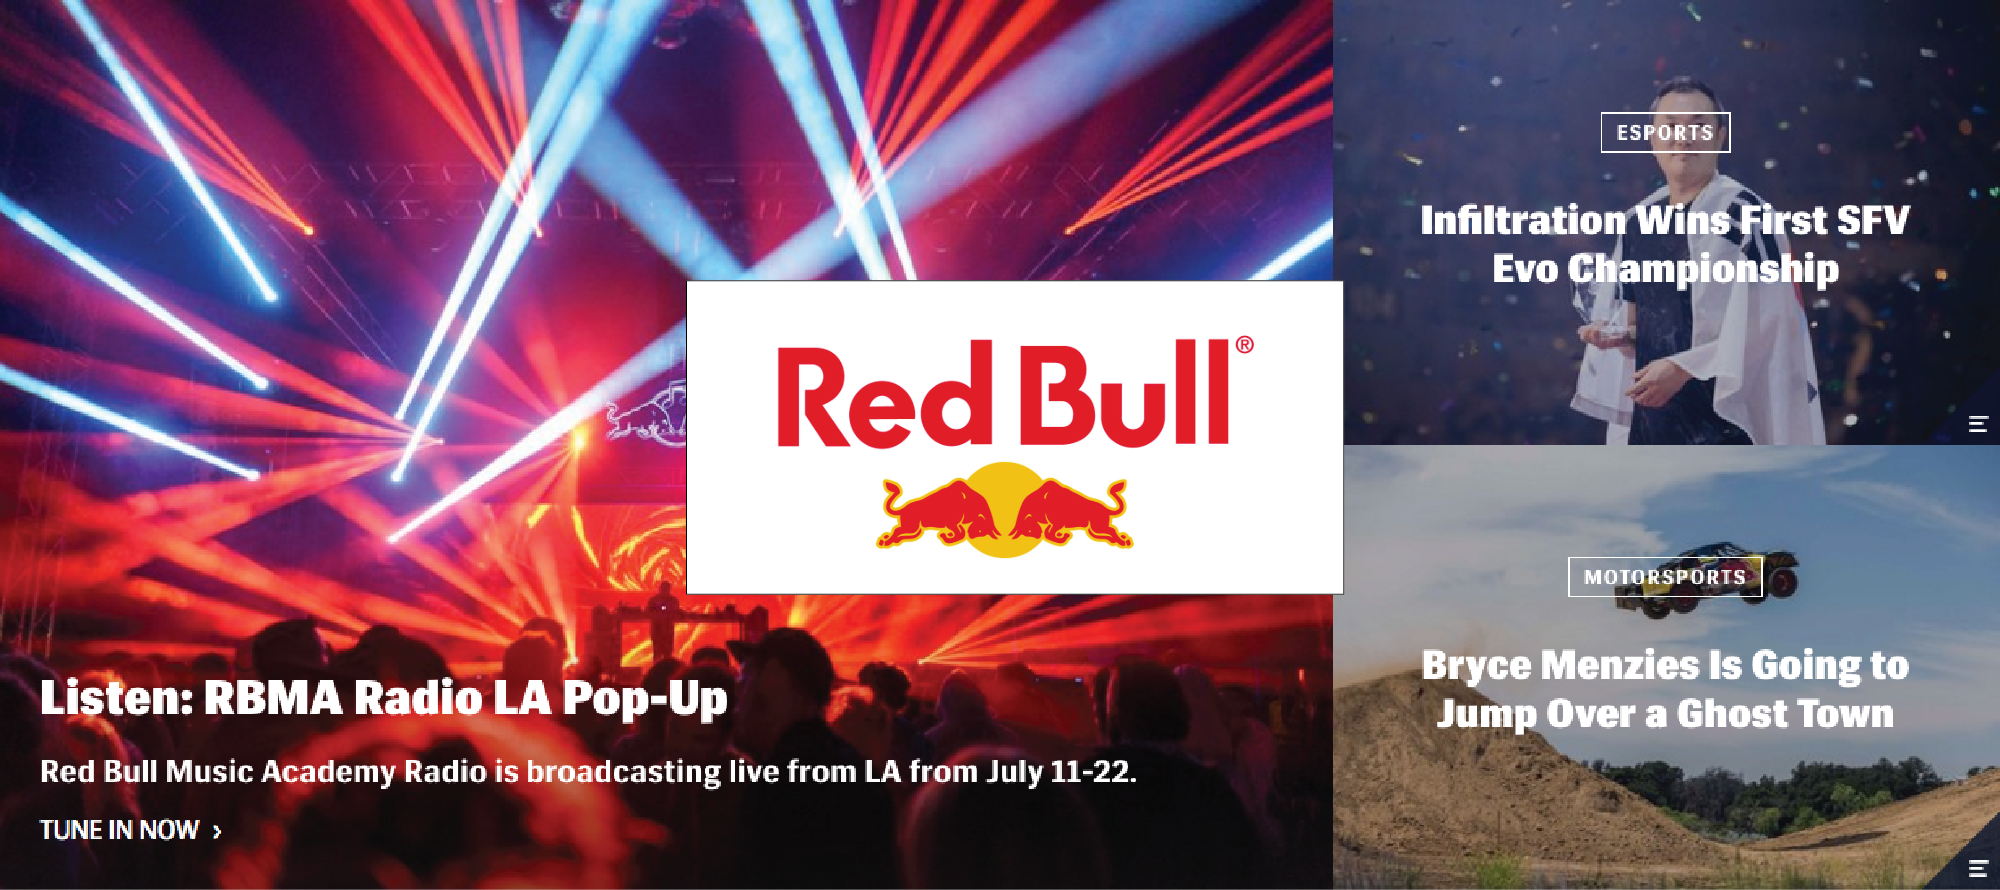 RedBull Content Banner.png